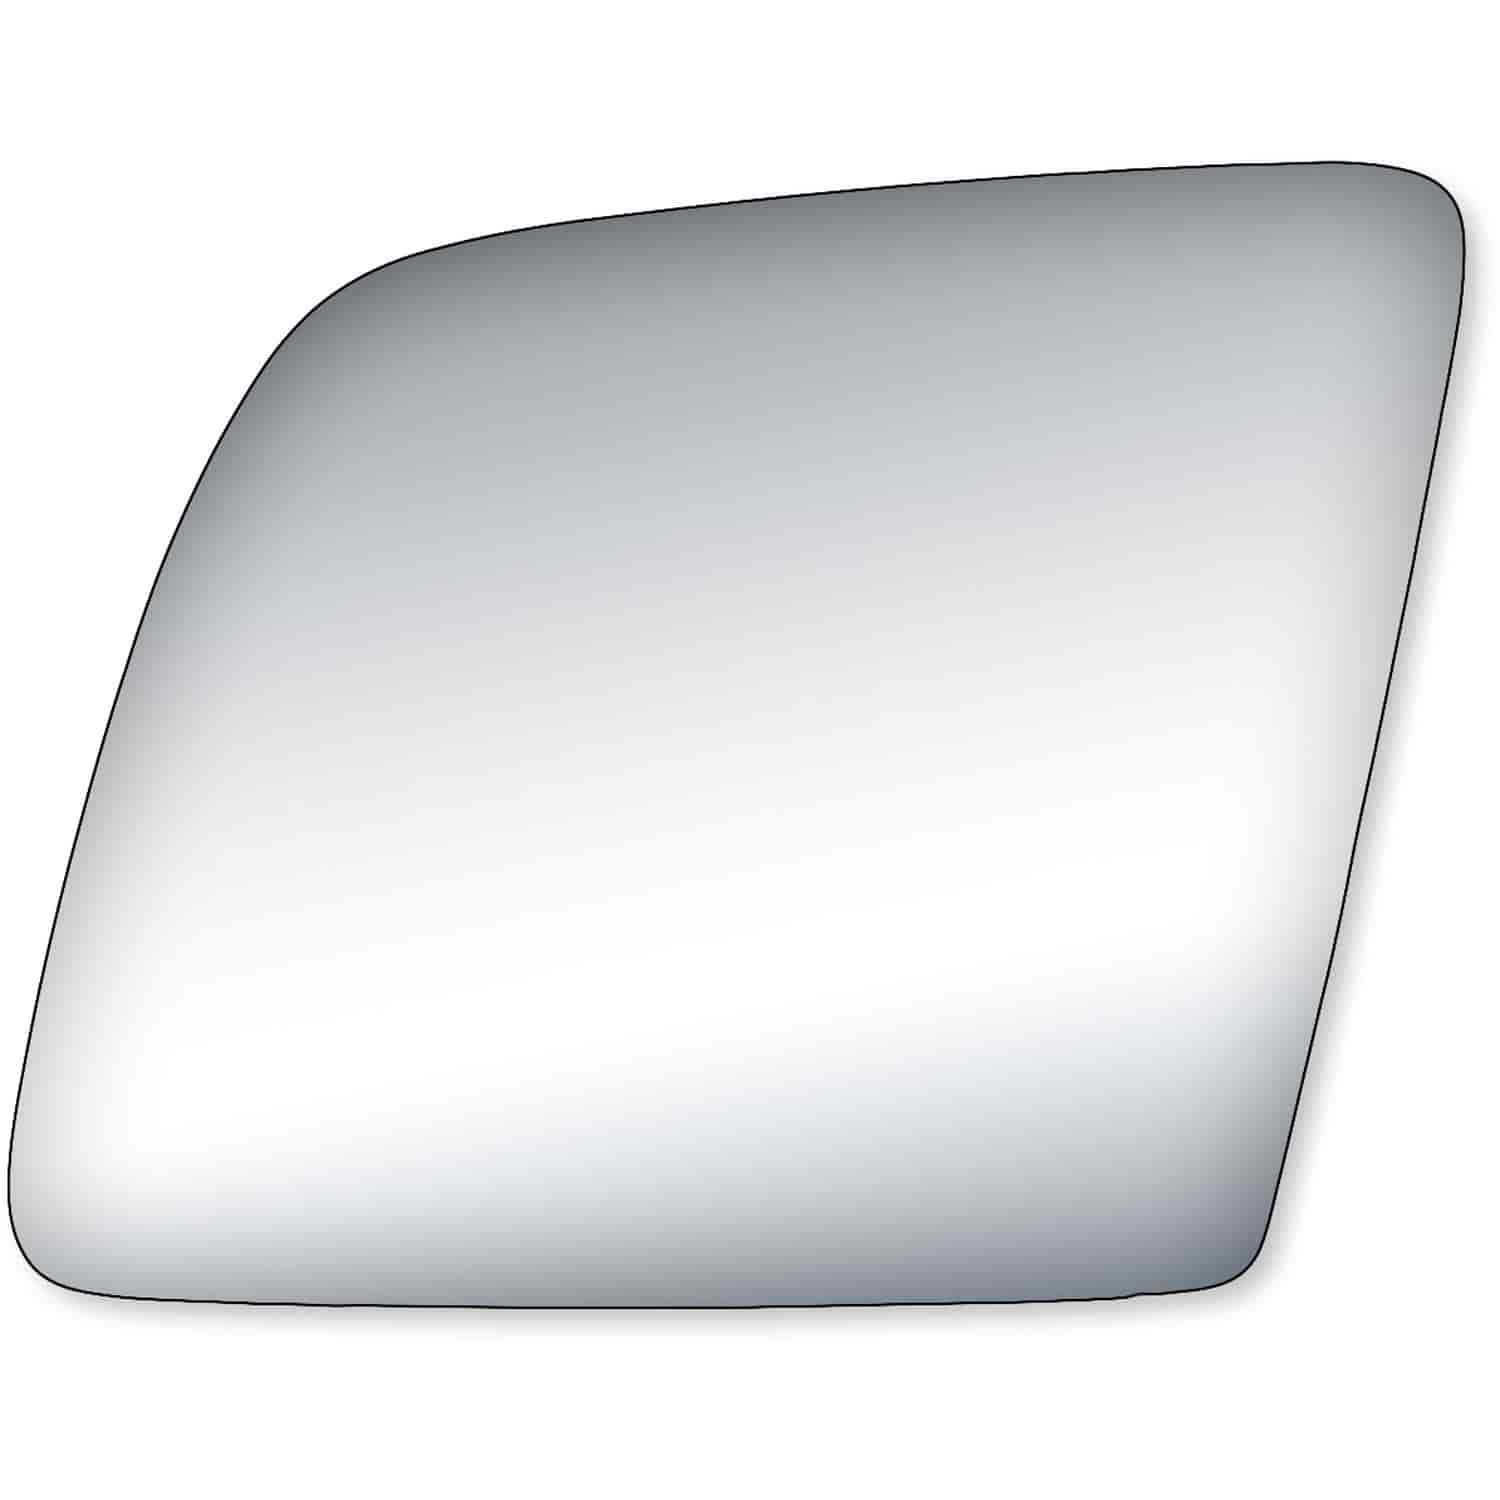 Replacement Glass for 92-0 6Econoline Van the glass measures 8 3/8 tall by 10 7/8 wide and 13 1/8 di